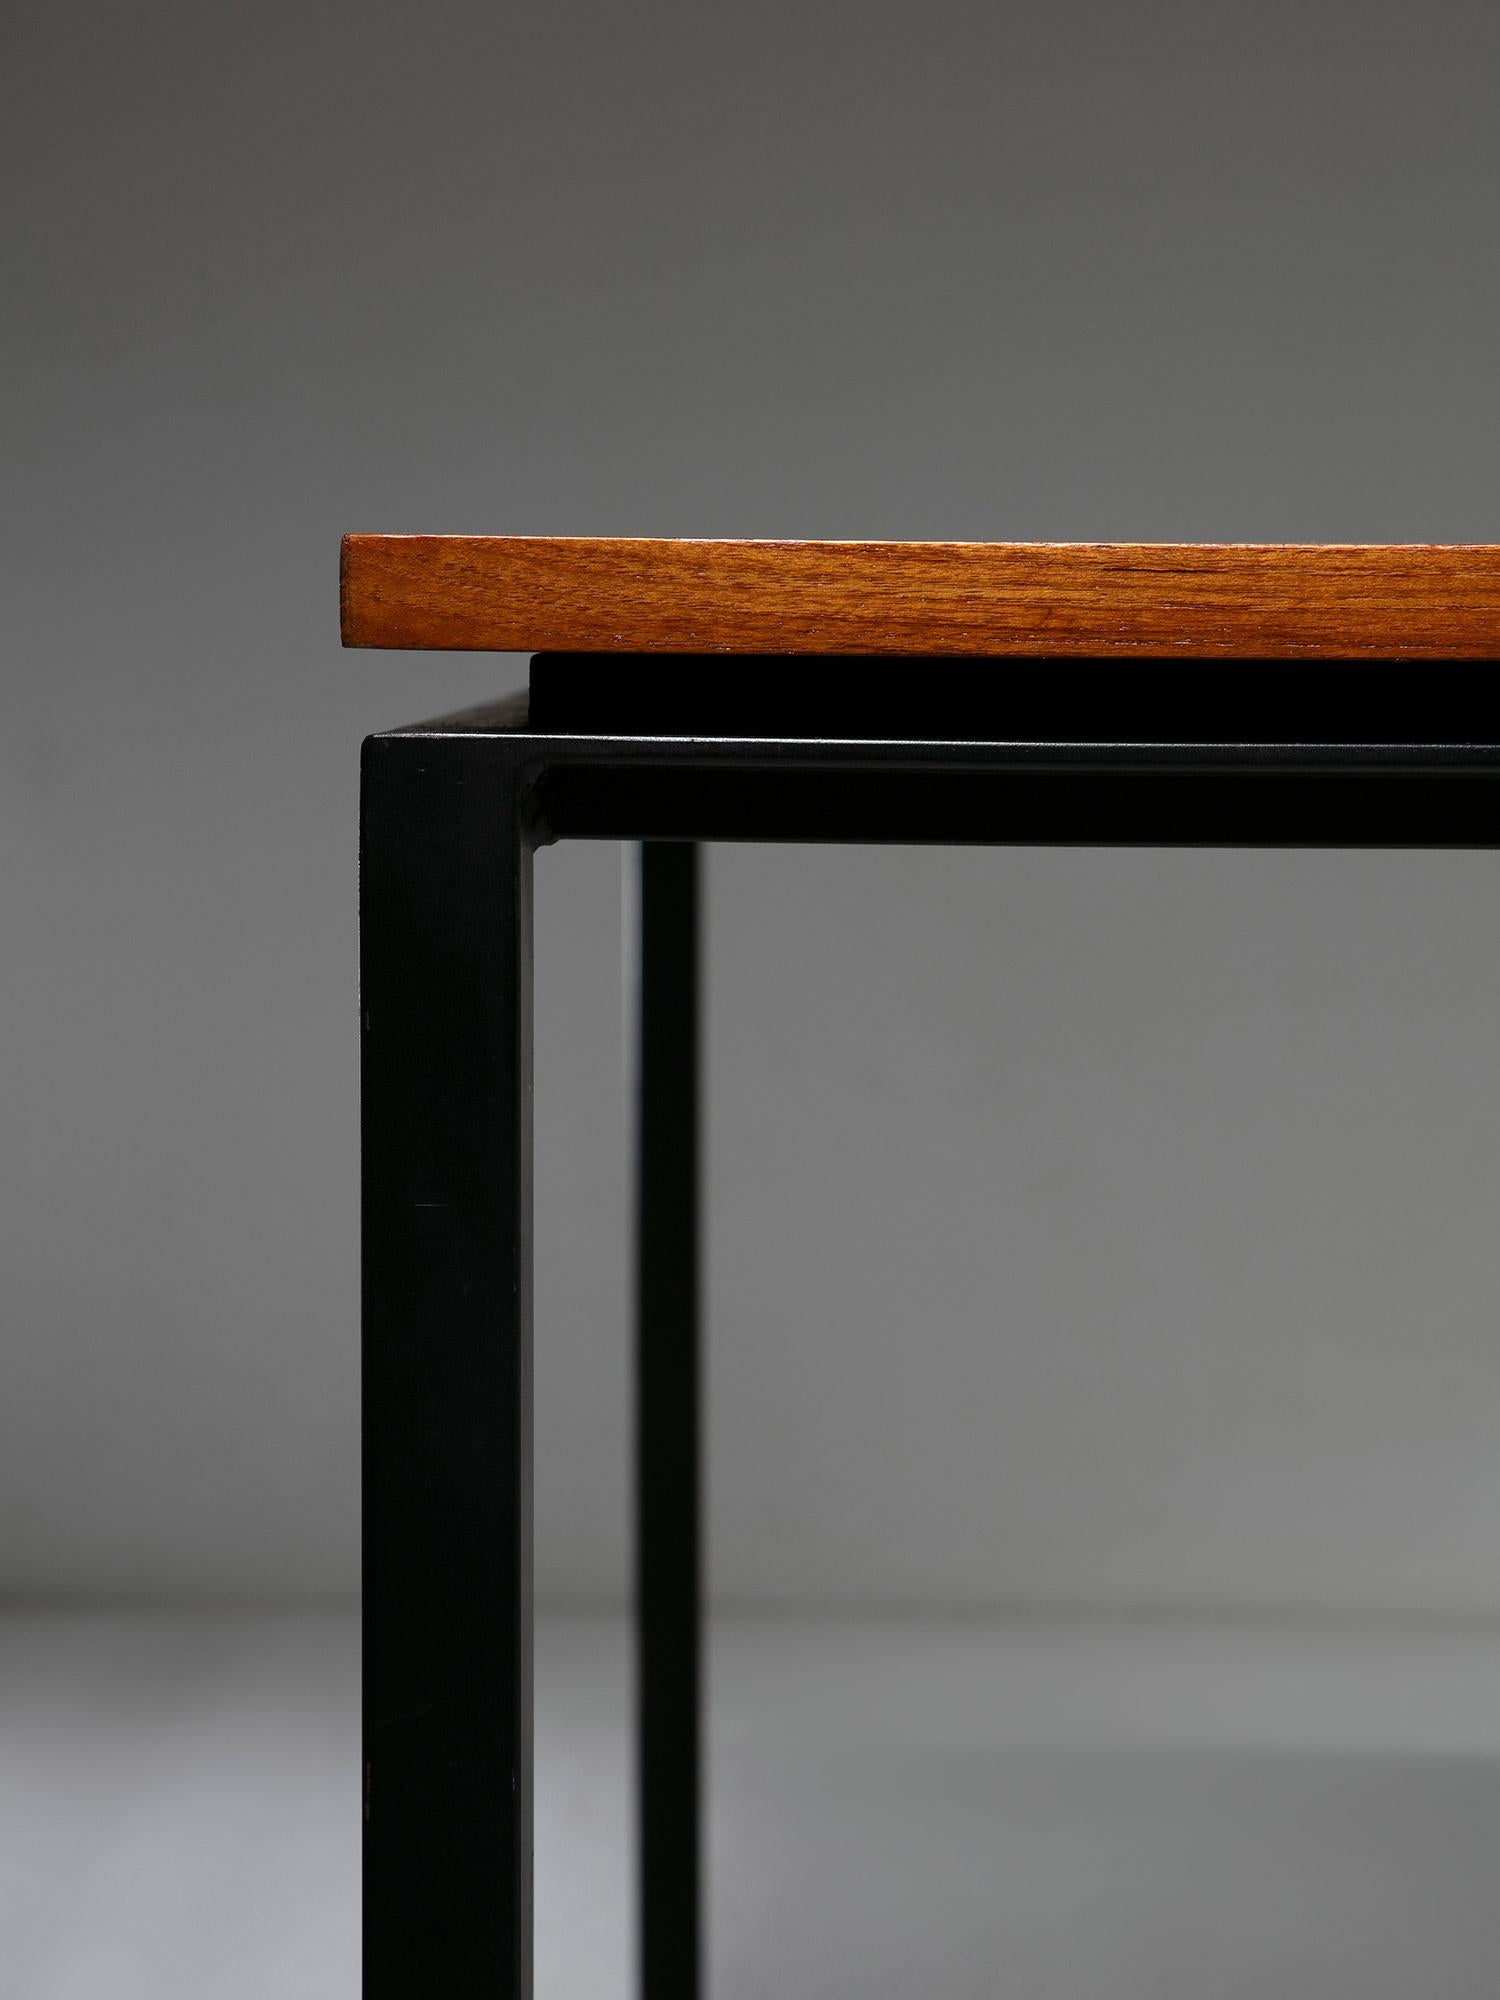 Mid-20th Century Wood Squared Dining Table by Paolo Tilche for Arform, Italy, 1950s For Sale